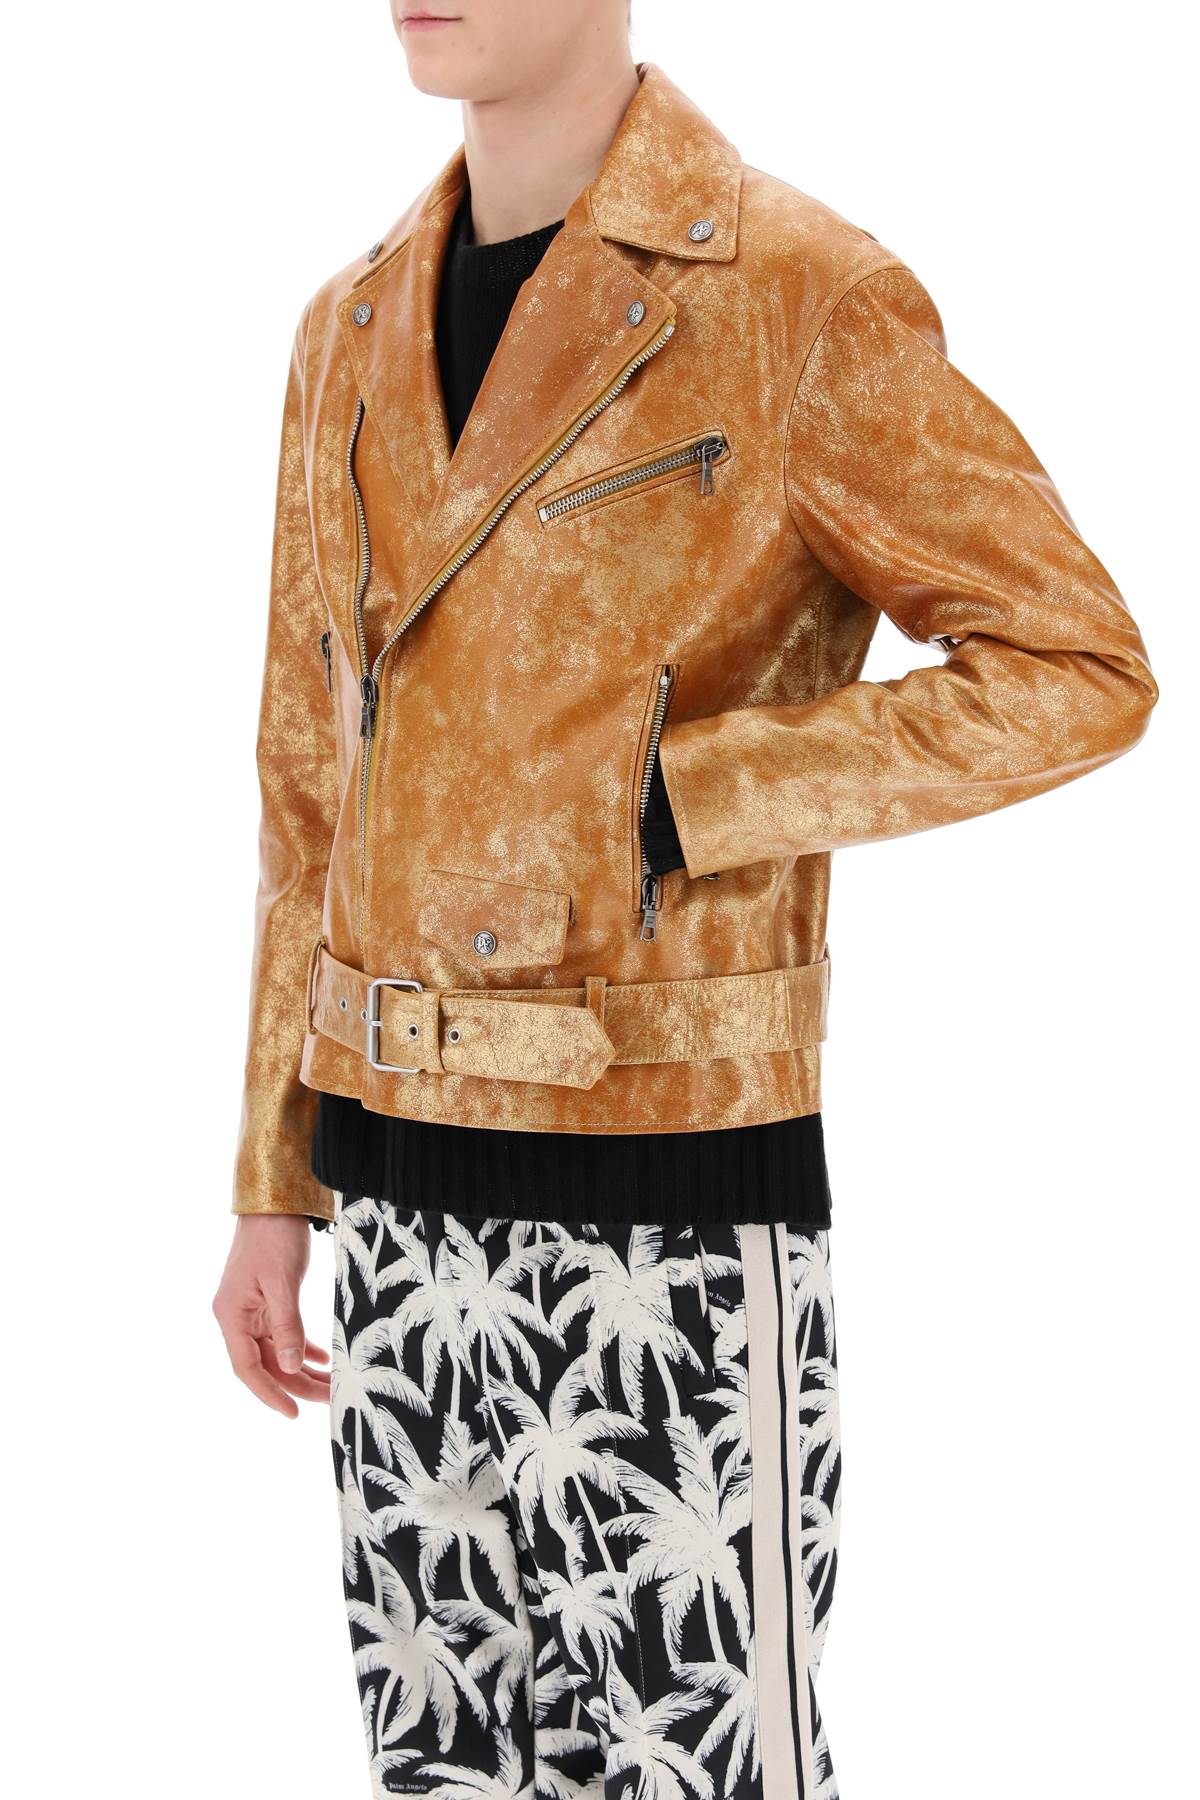 Palm angels pa city biker jacket in laminated leather-3